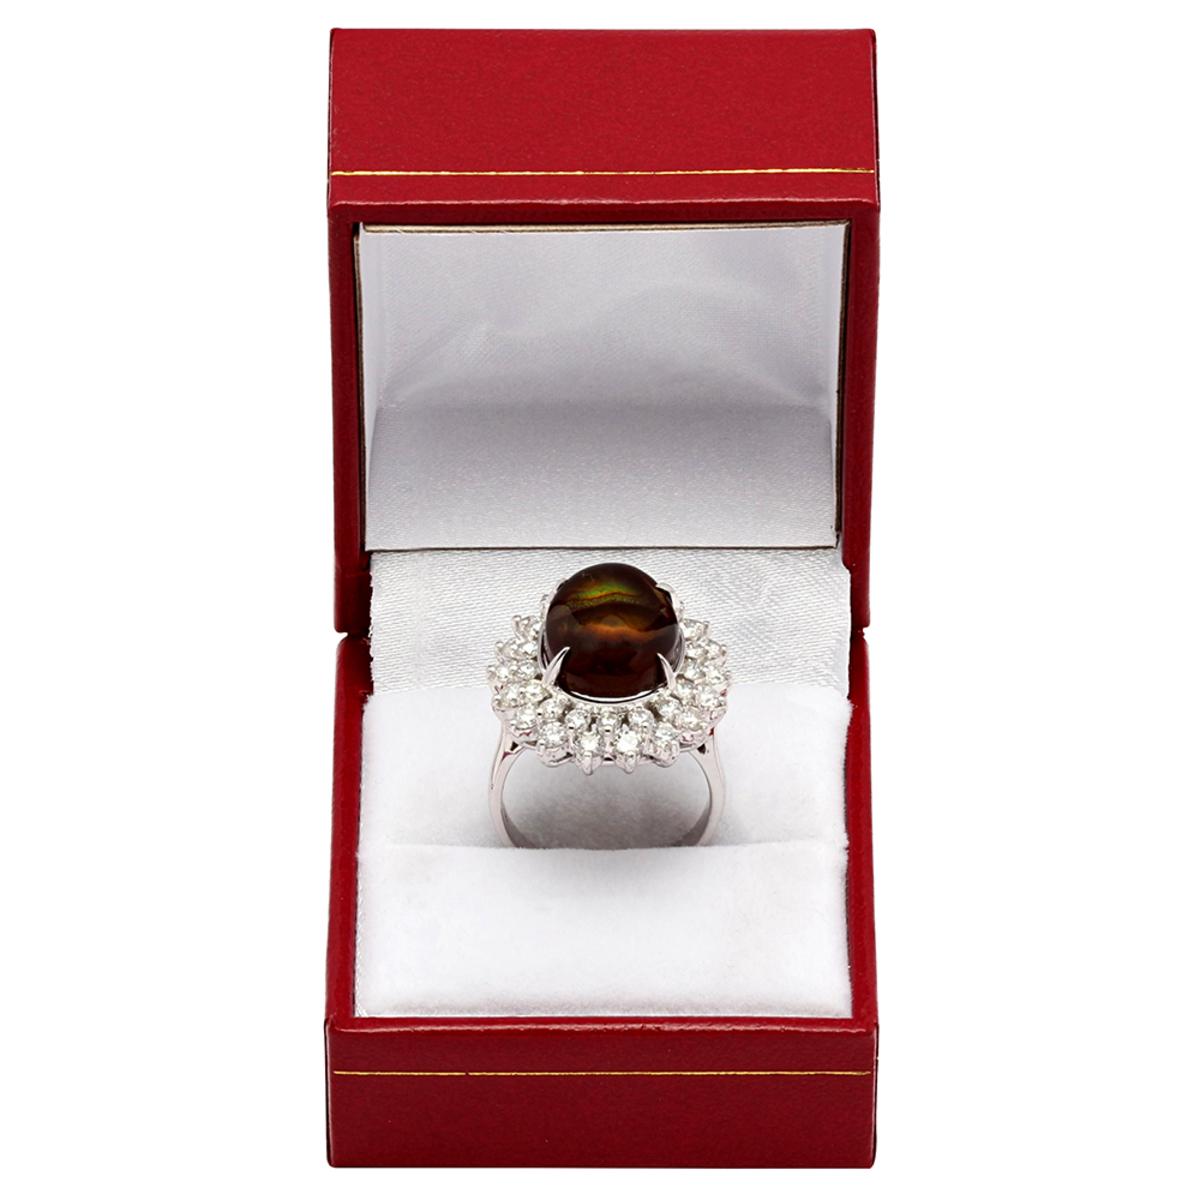 14k White Gold 4.18ct Fire Agate 1.99ct Diamond Ring